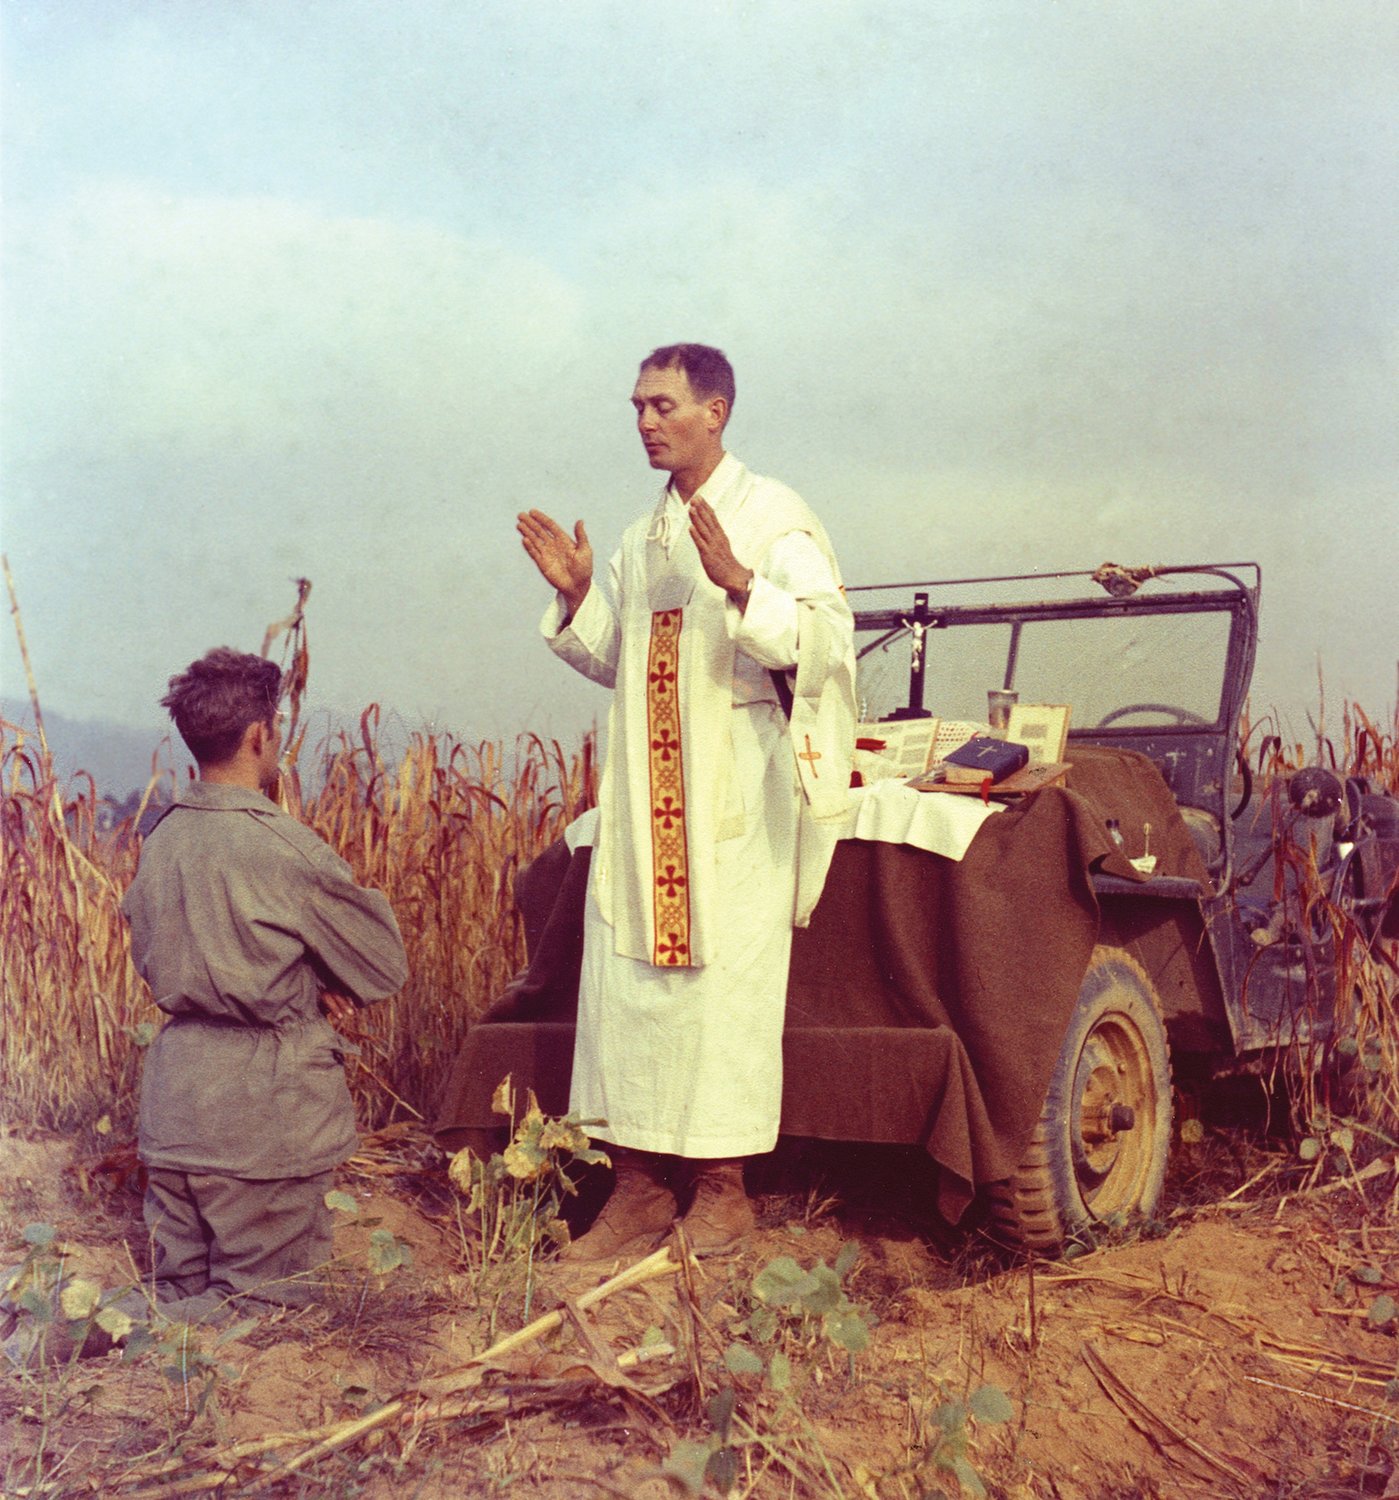 U.S. Army chaplain Father Emil Joseph Kapaun, who died May 23, 1951, in a North Korean prisoner of war camp, is pictured celebrating Mass from the hood of a jeep Oct. 7, 1950, in South Korea. He is a candidate for sainthood.